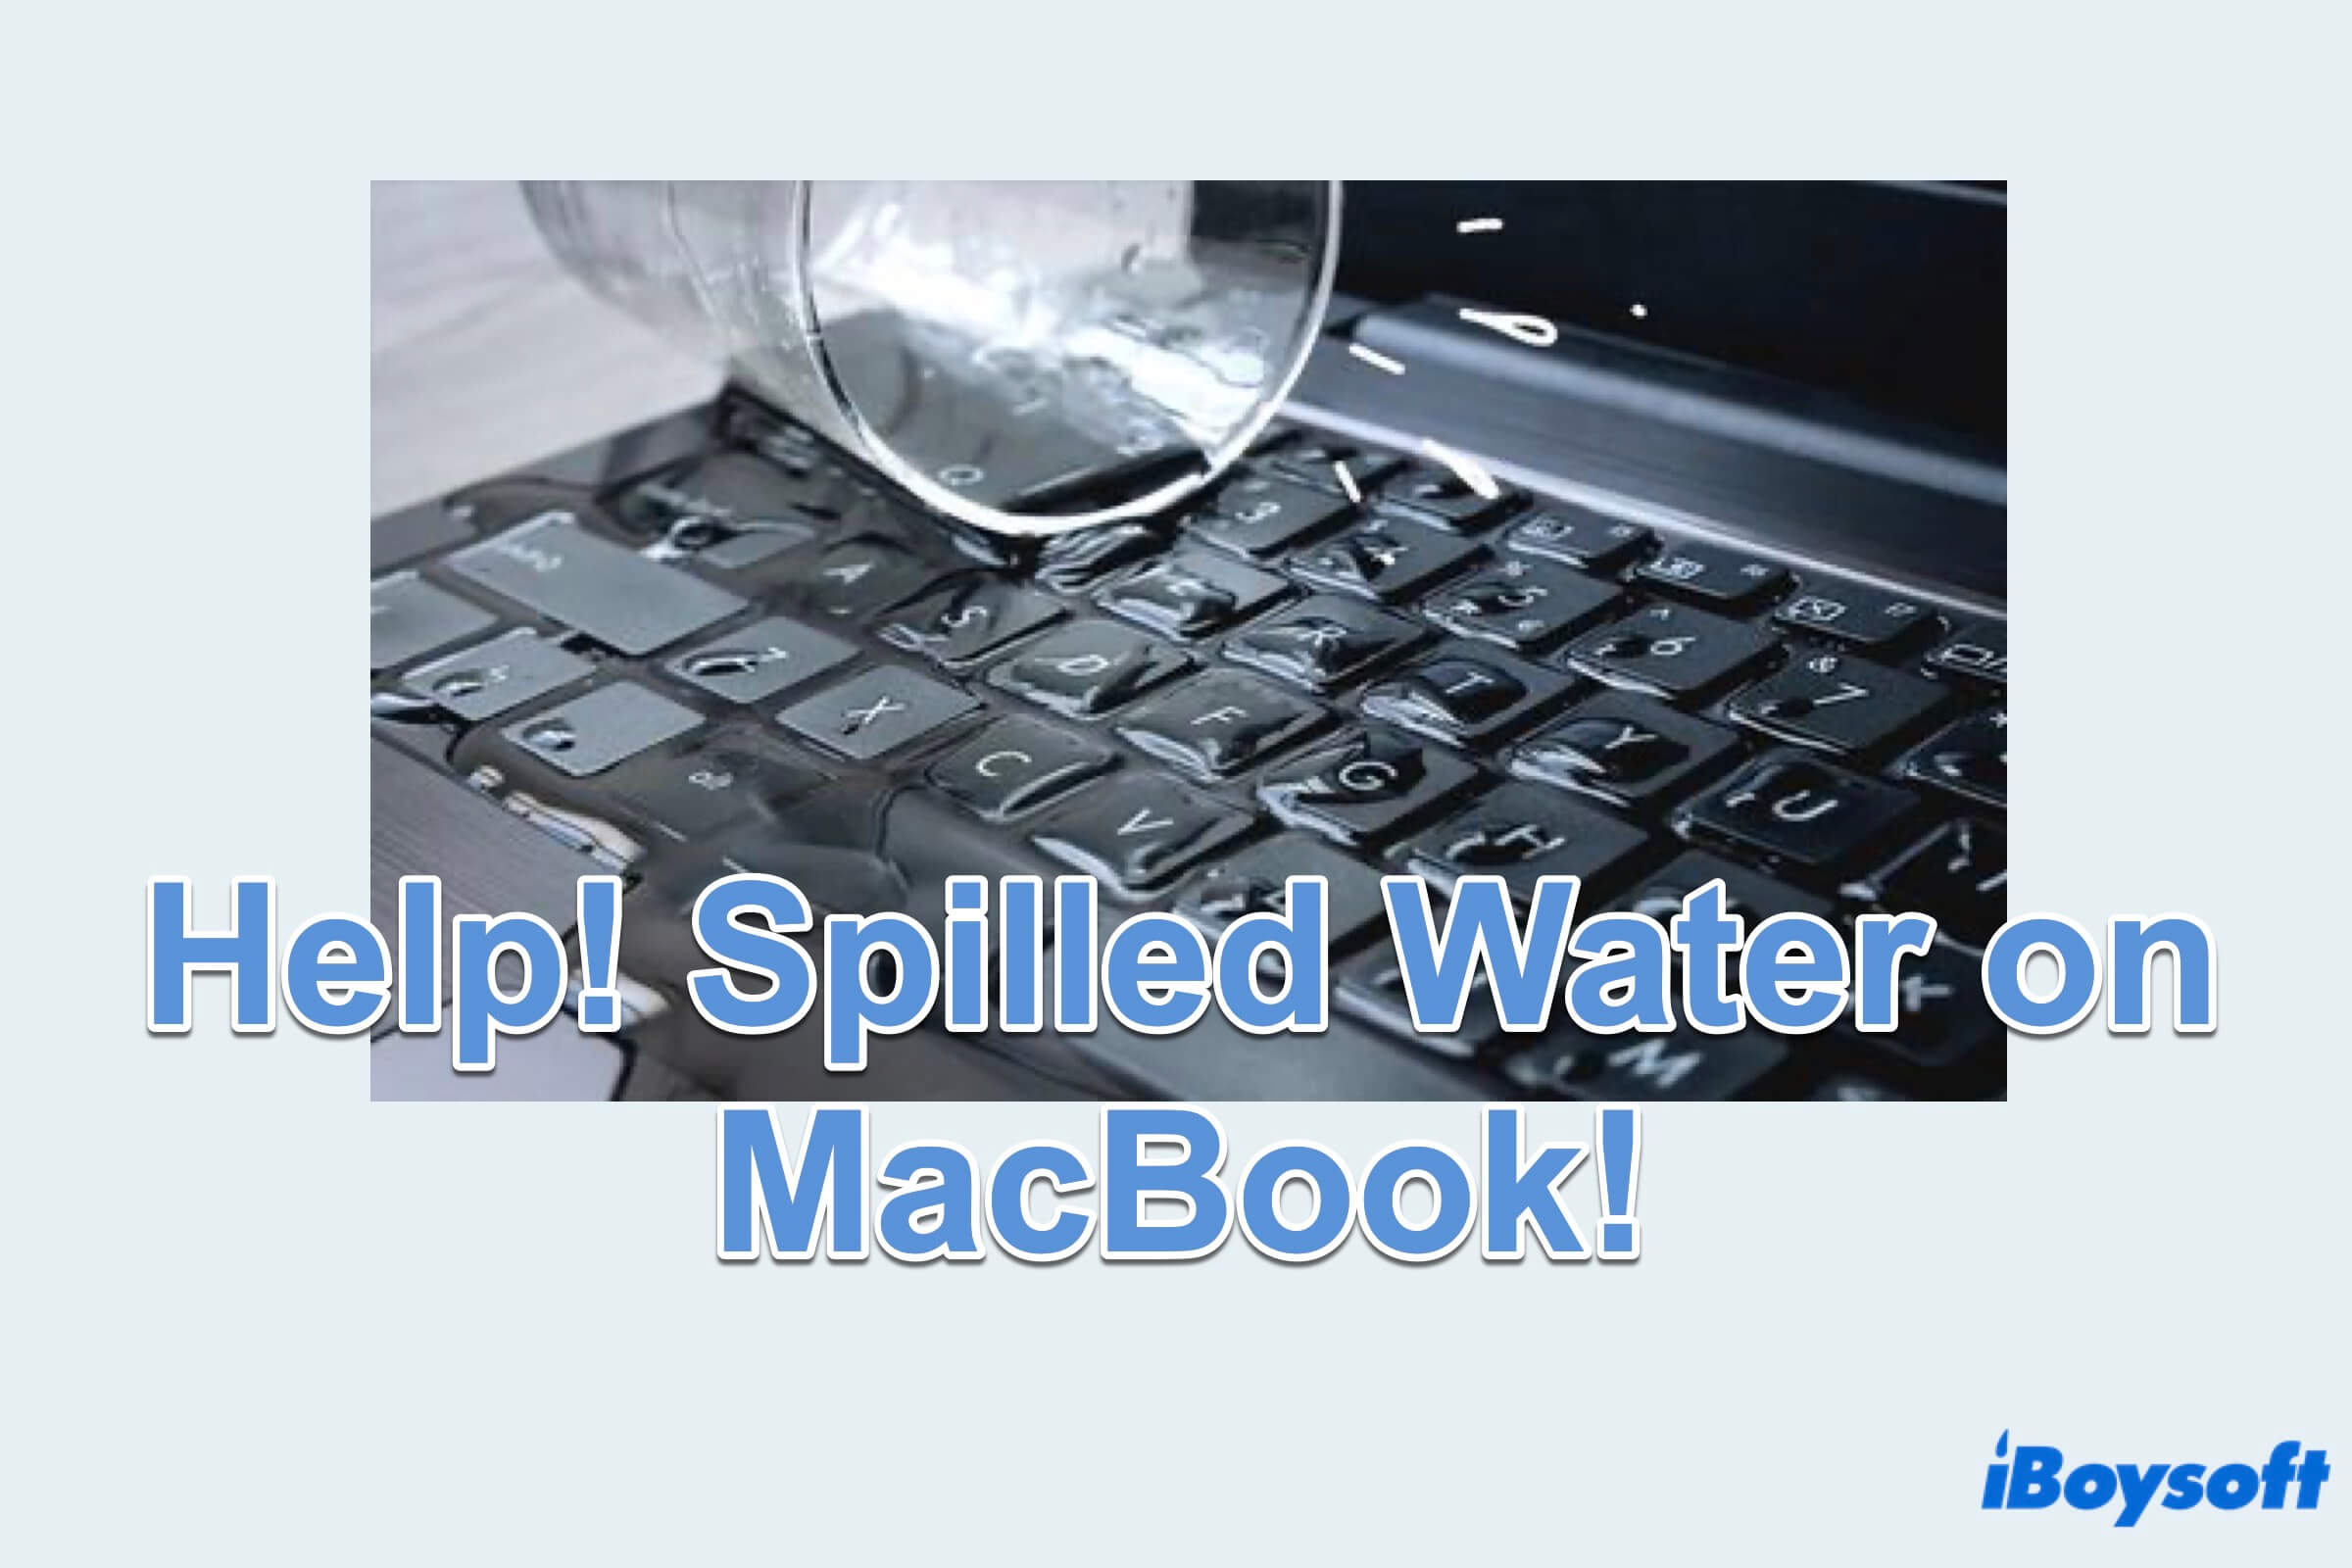 Summary of Spilled Water on MacBook